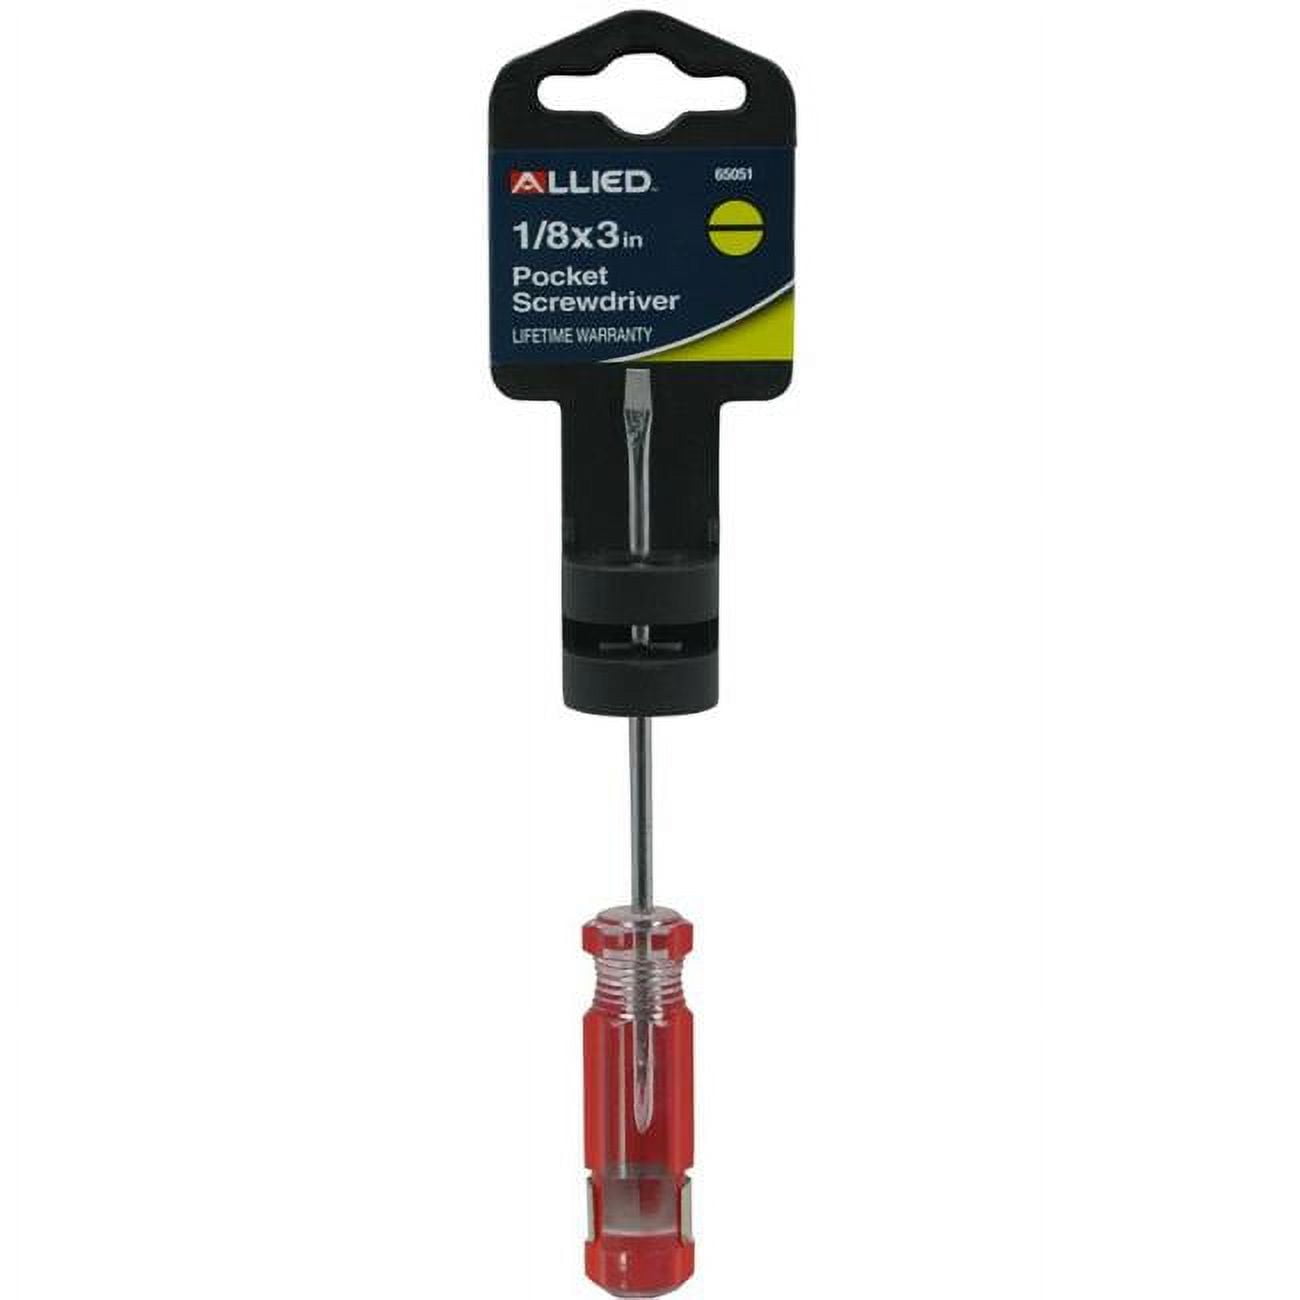 Picture of Allied 65051 0.12 x 3 in. Pocket Screwdriver with Clip